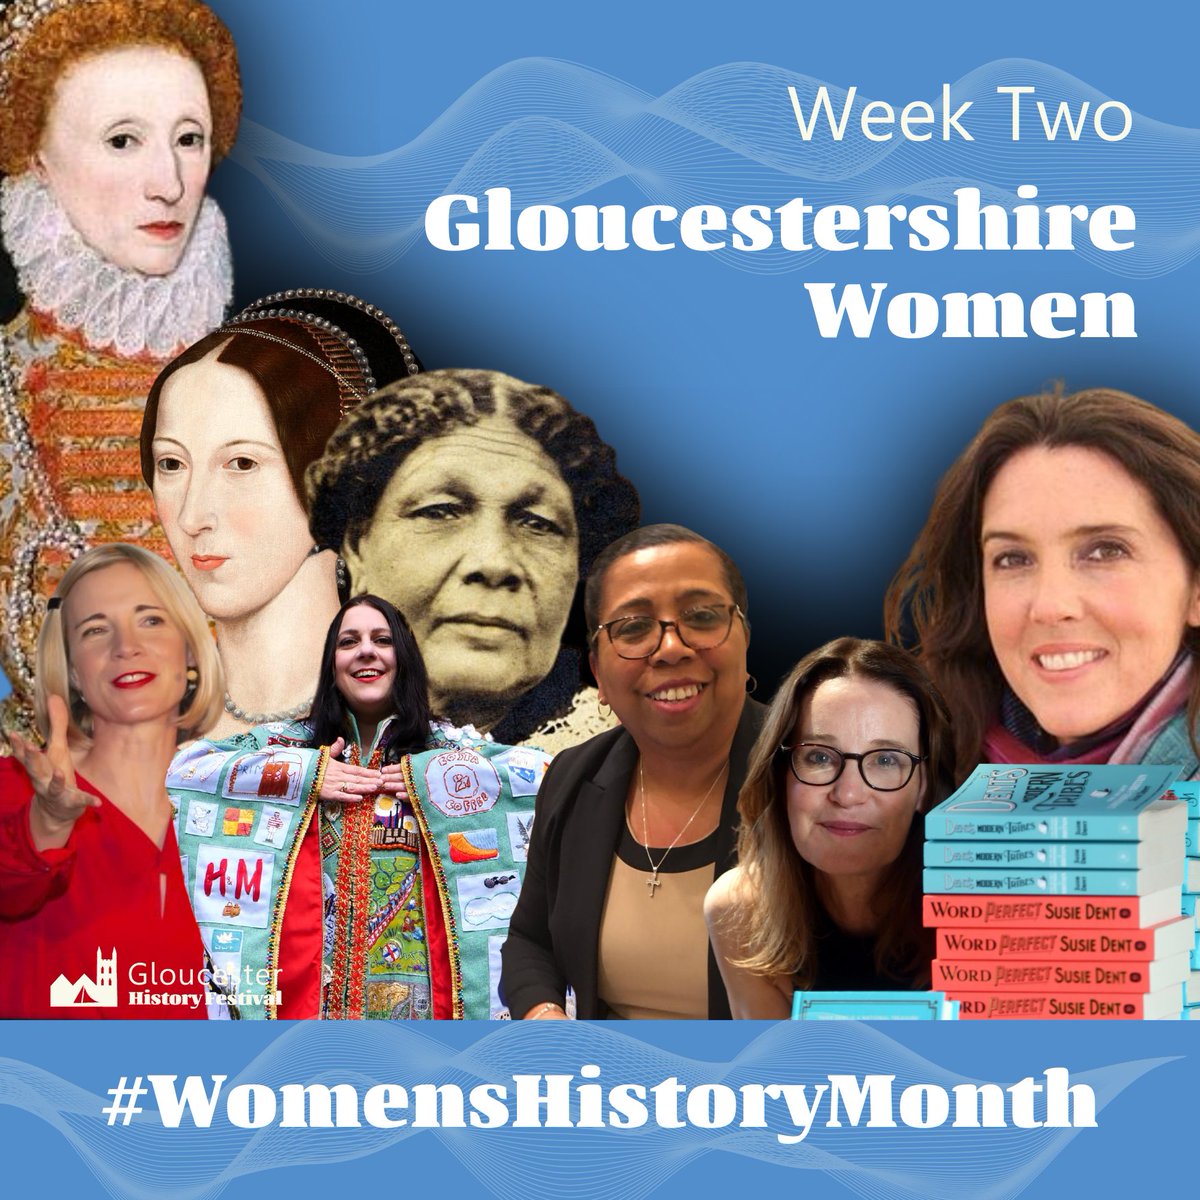 Week Two of #WomensHistoryMonth. This week we'd like to bring it home to Gloucestershire. Who in Gloucester's history stands out for you? We'd love to hear from you. Comment below... @drjaninaramirez @visitgloucester #GlosHistFest24 #IWD